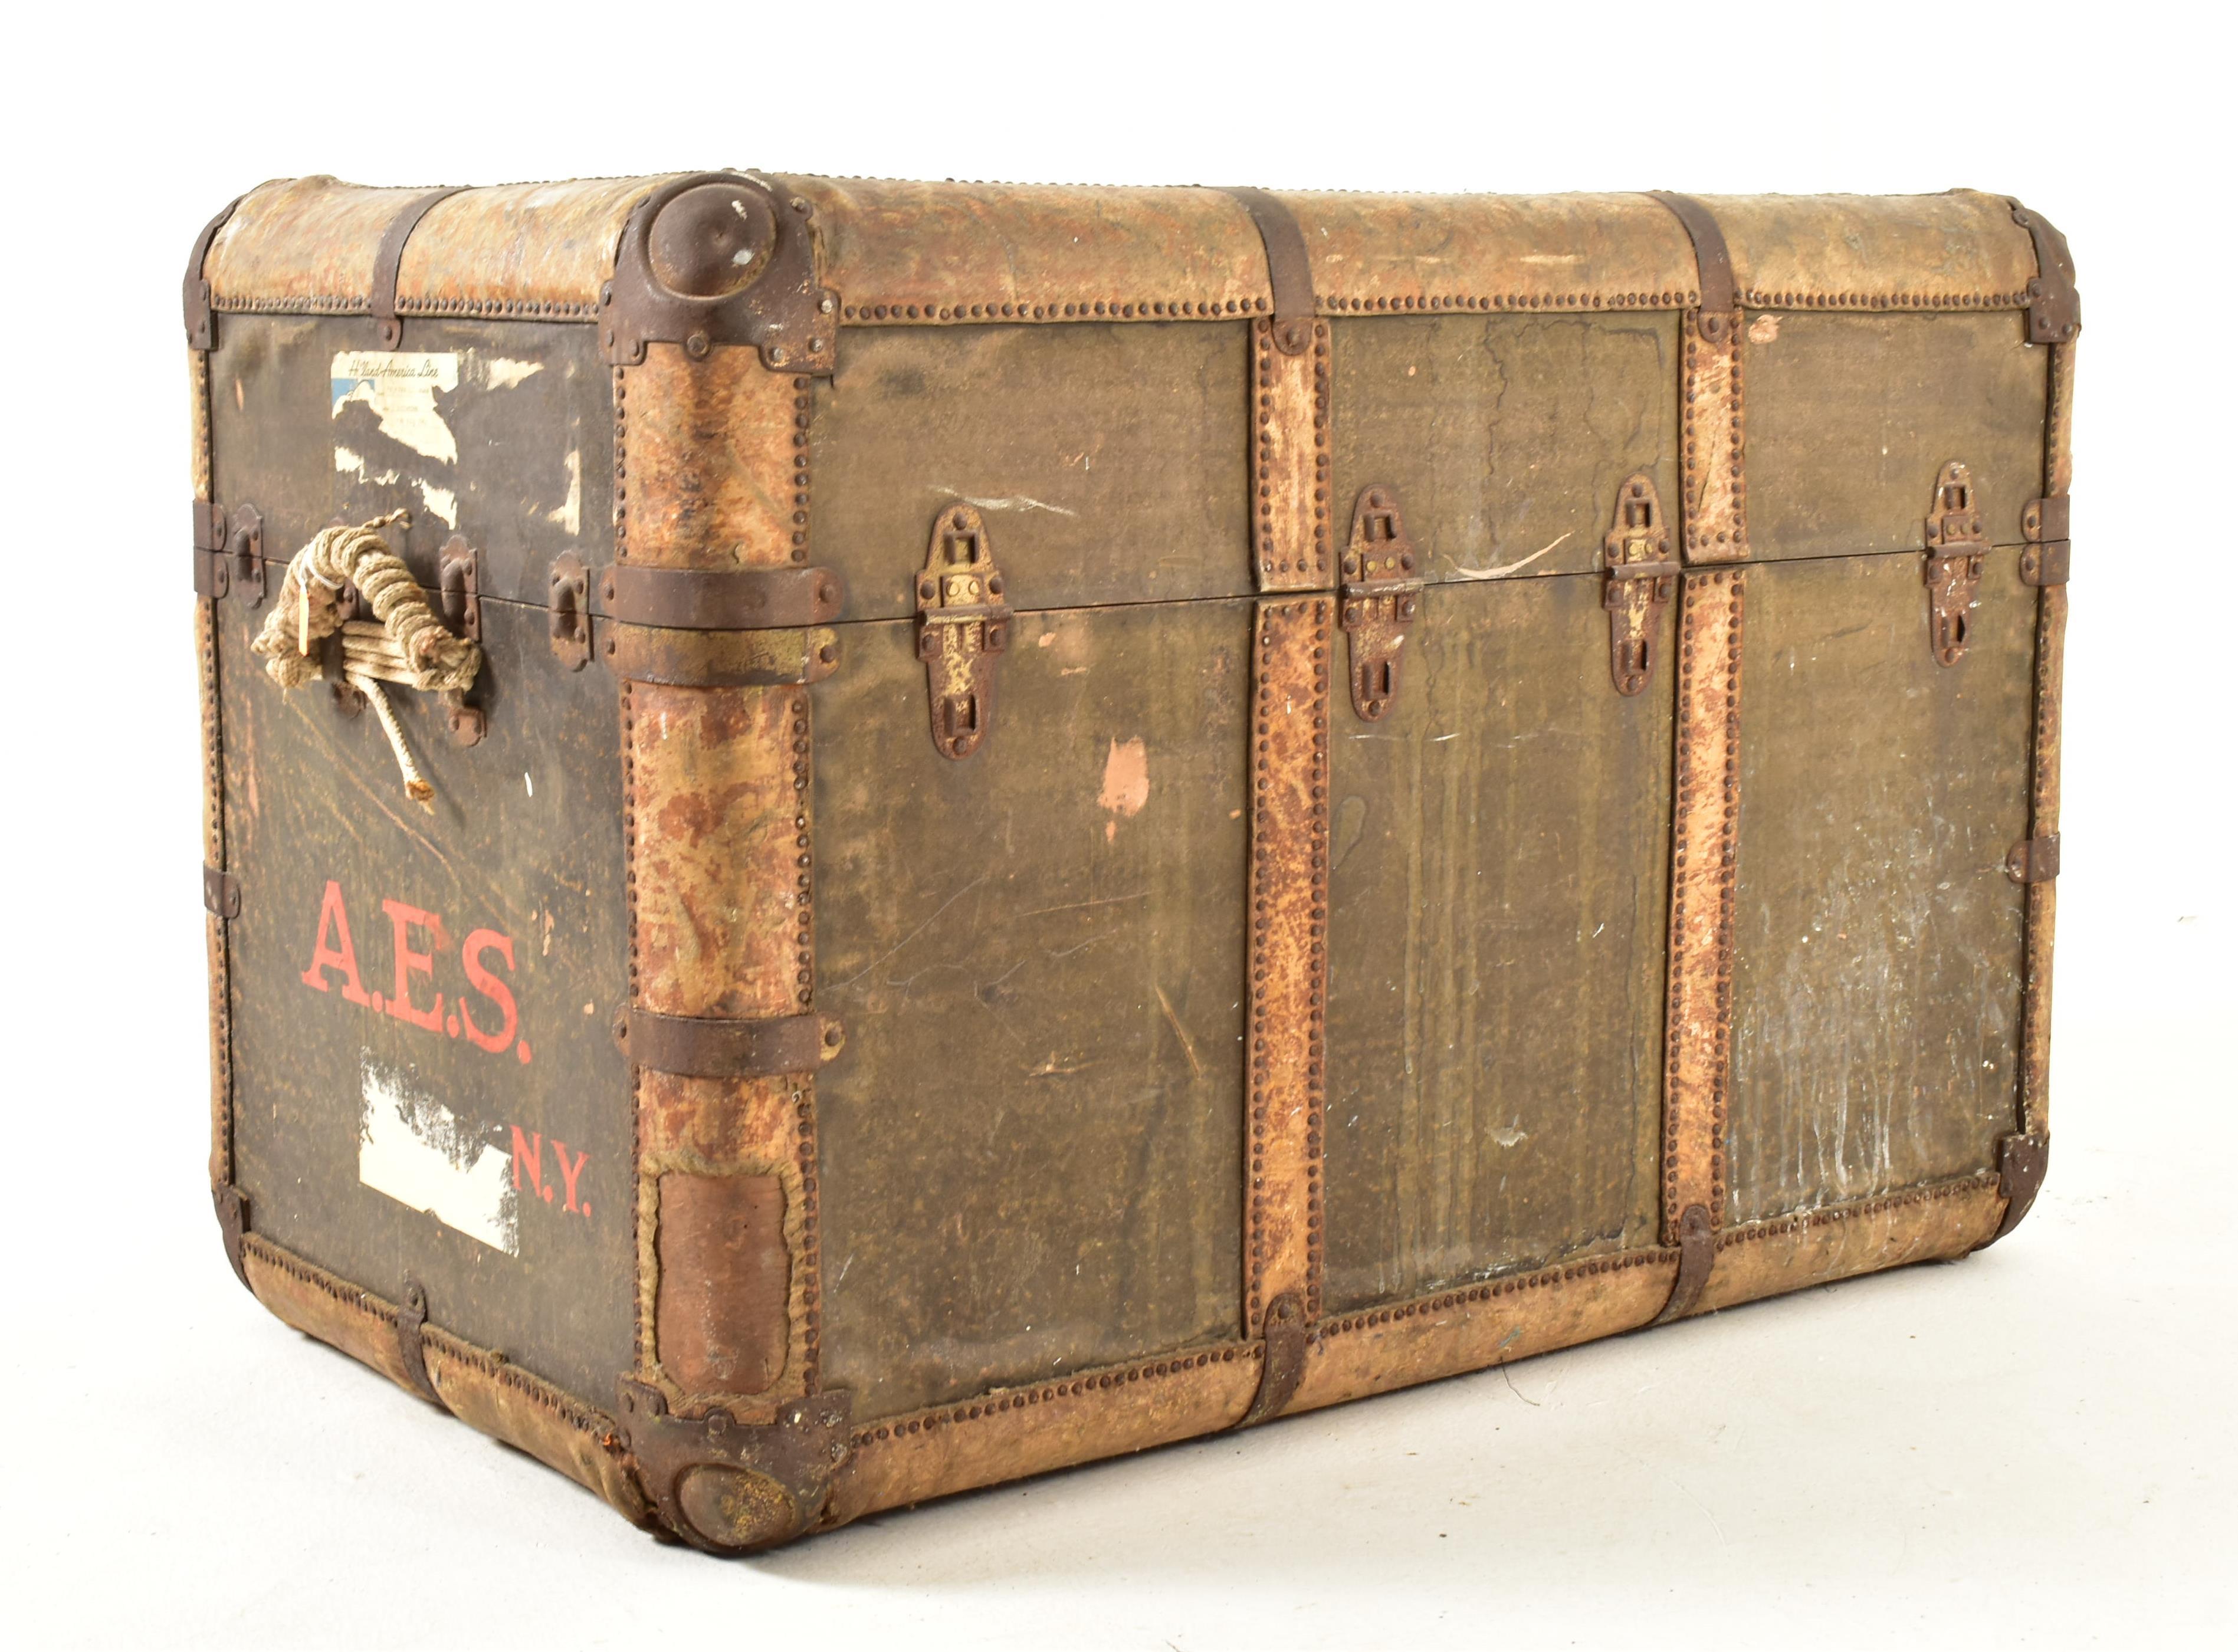 CROSS, LONDON - EARLY 20TH CENTURY LEATHER STEAMER TRUNK - Image 8 of 8